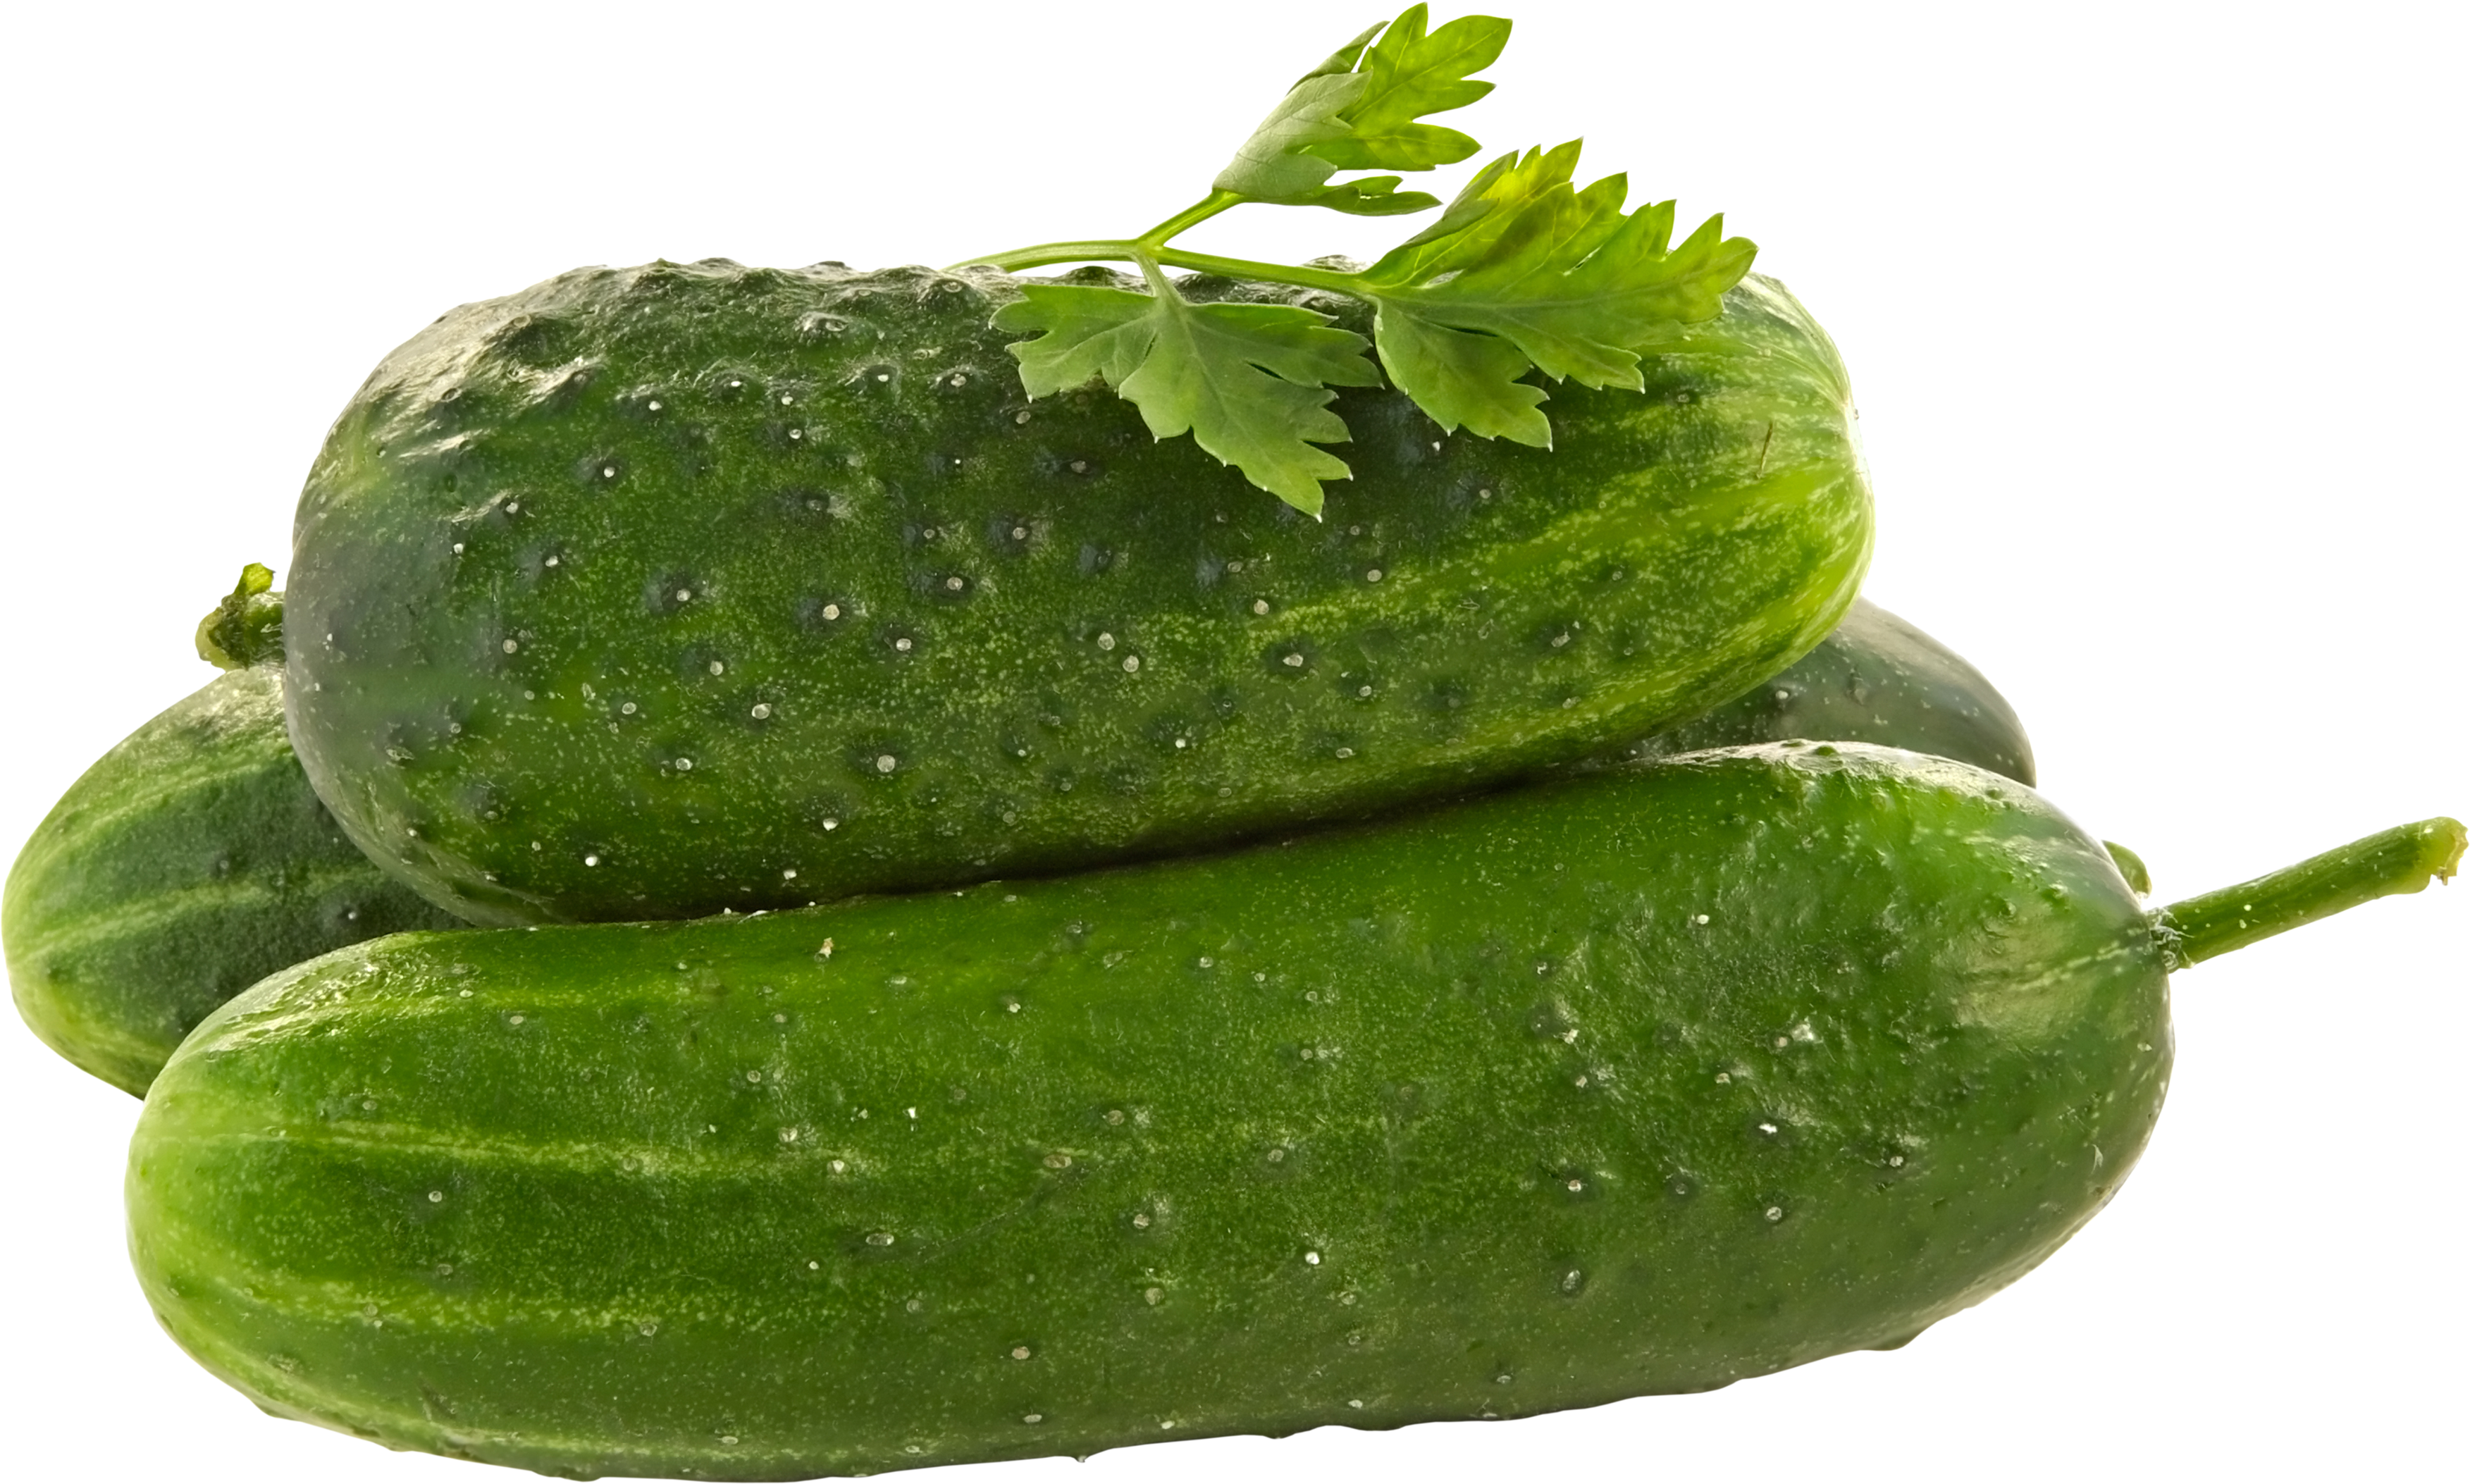 A Cucumbers With A Leaf On Top Of Them